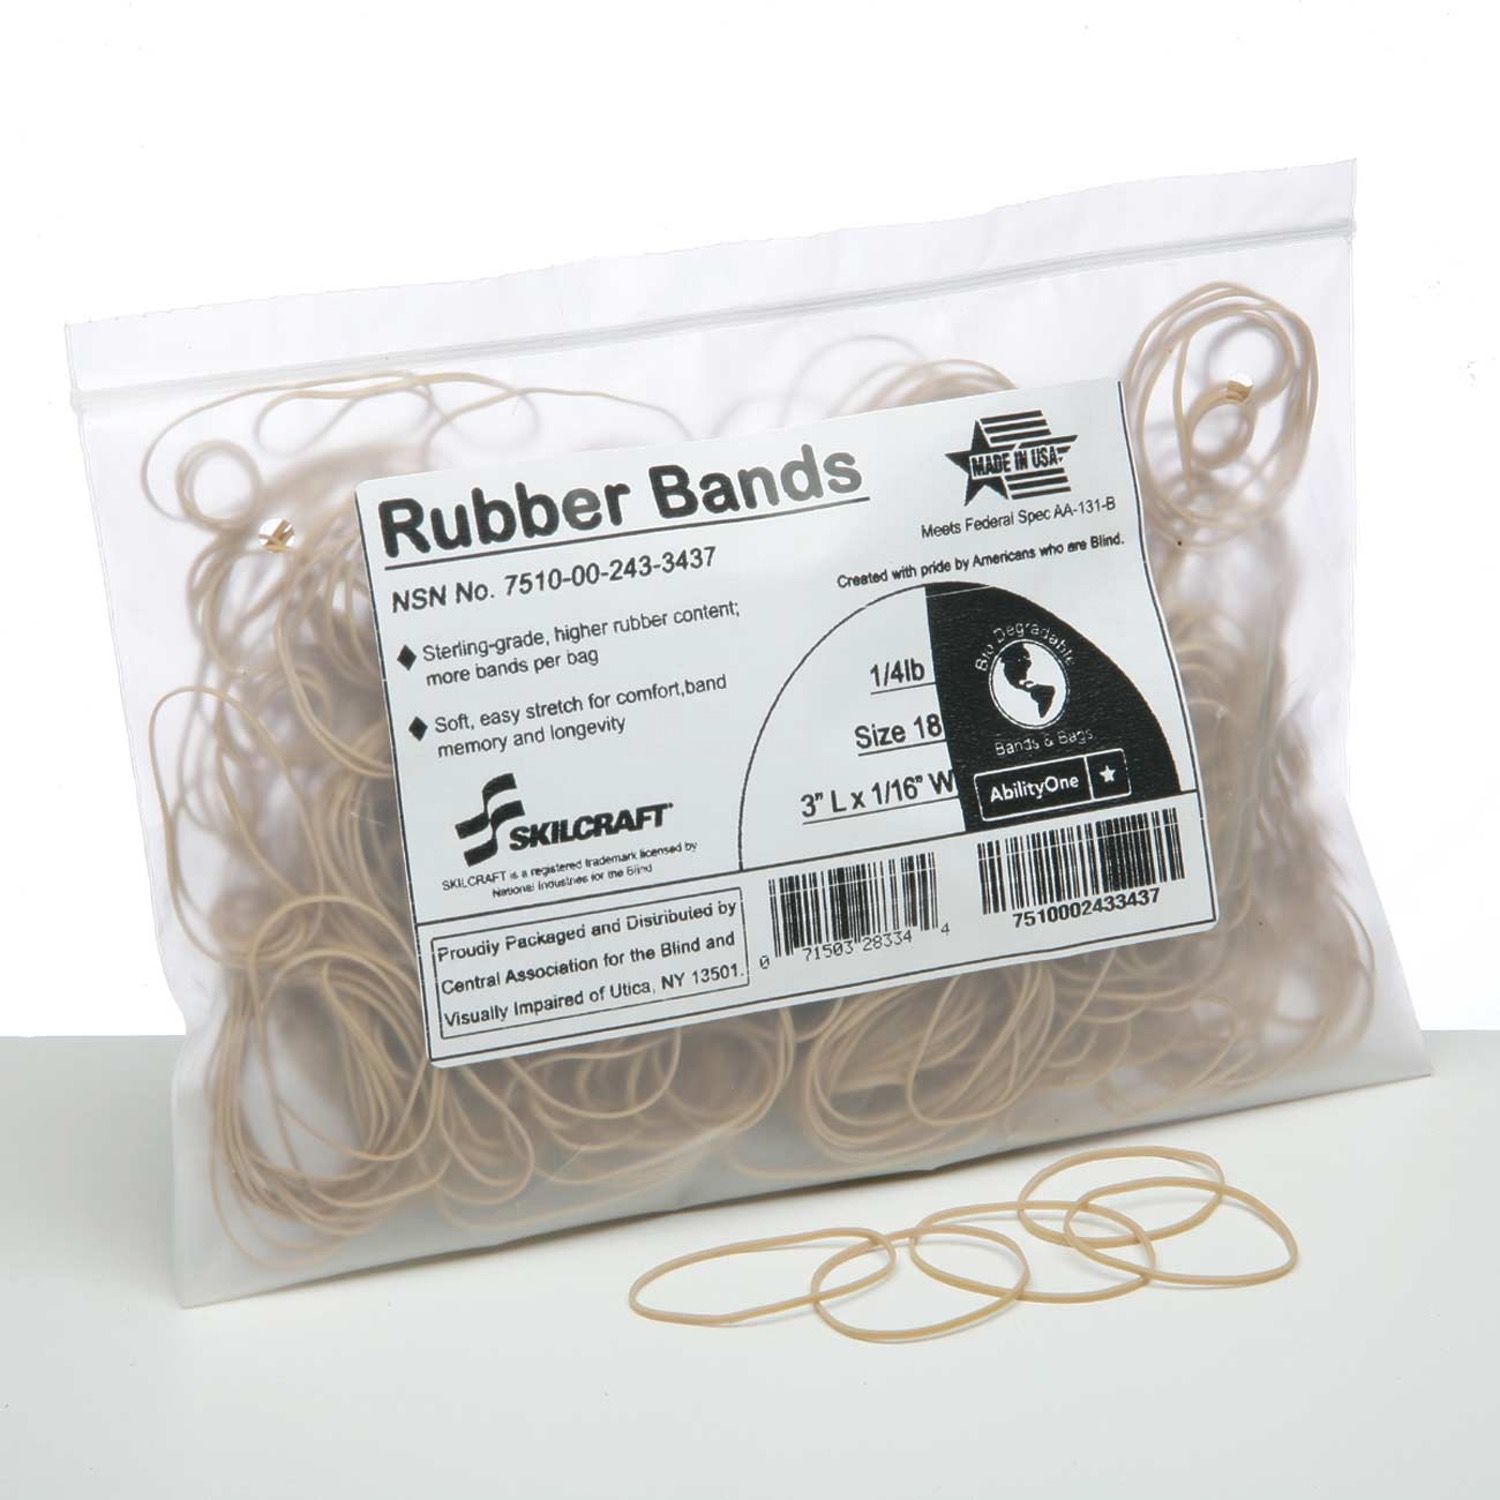 Where to Find the Safest Latex-Free Rubber Bands